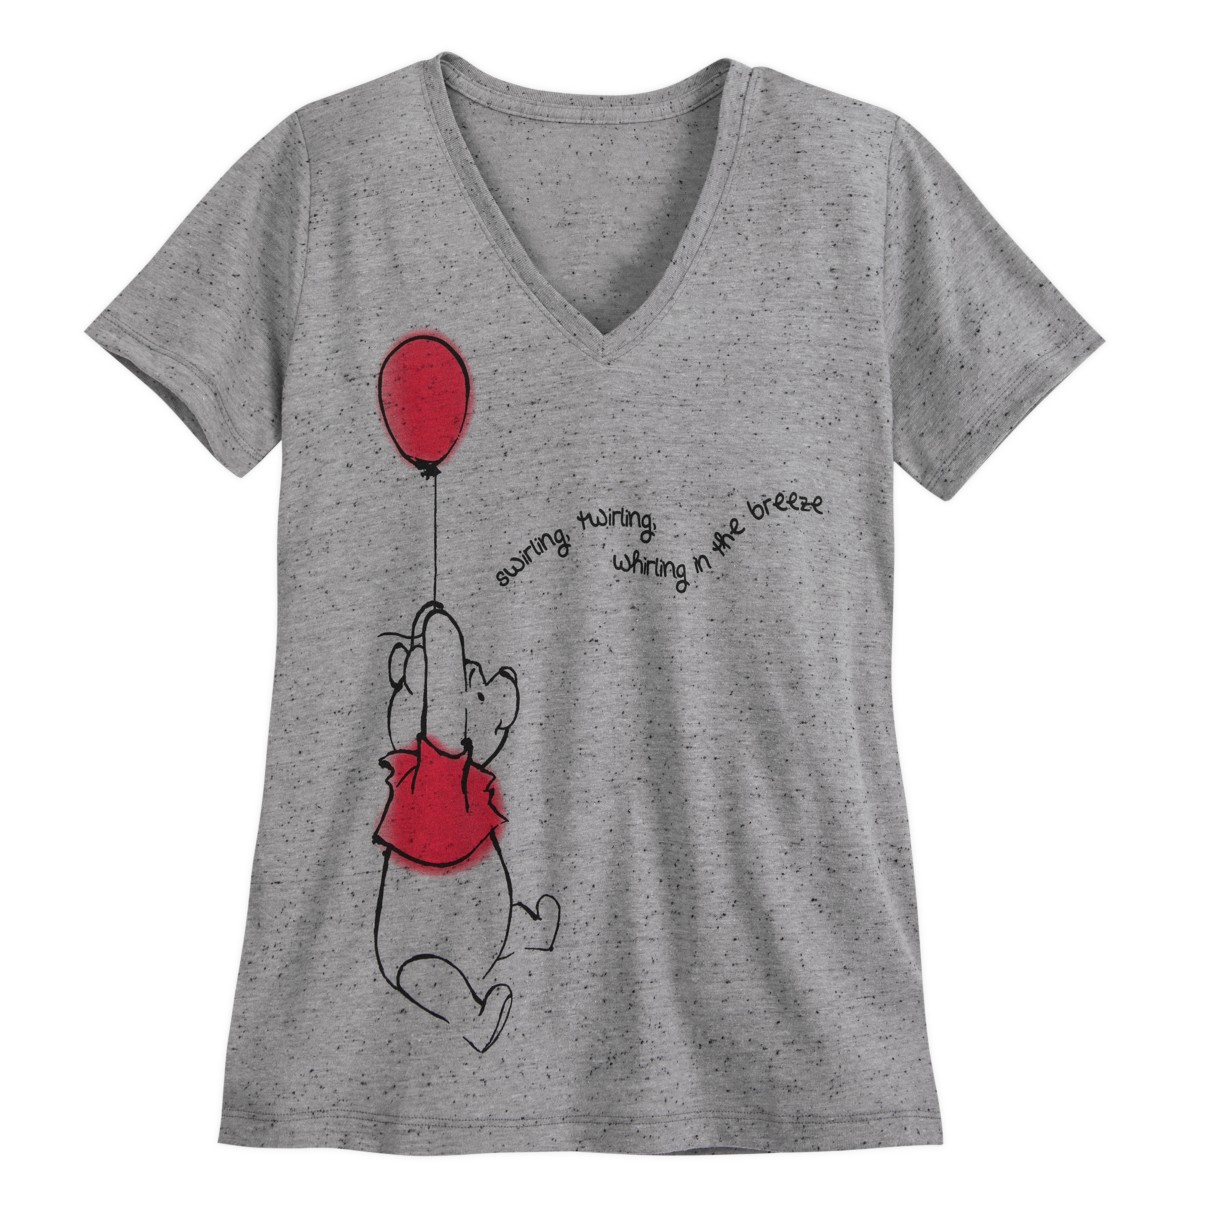 Winnie the Pooh T-Shirt for Women